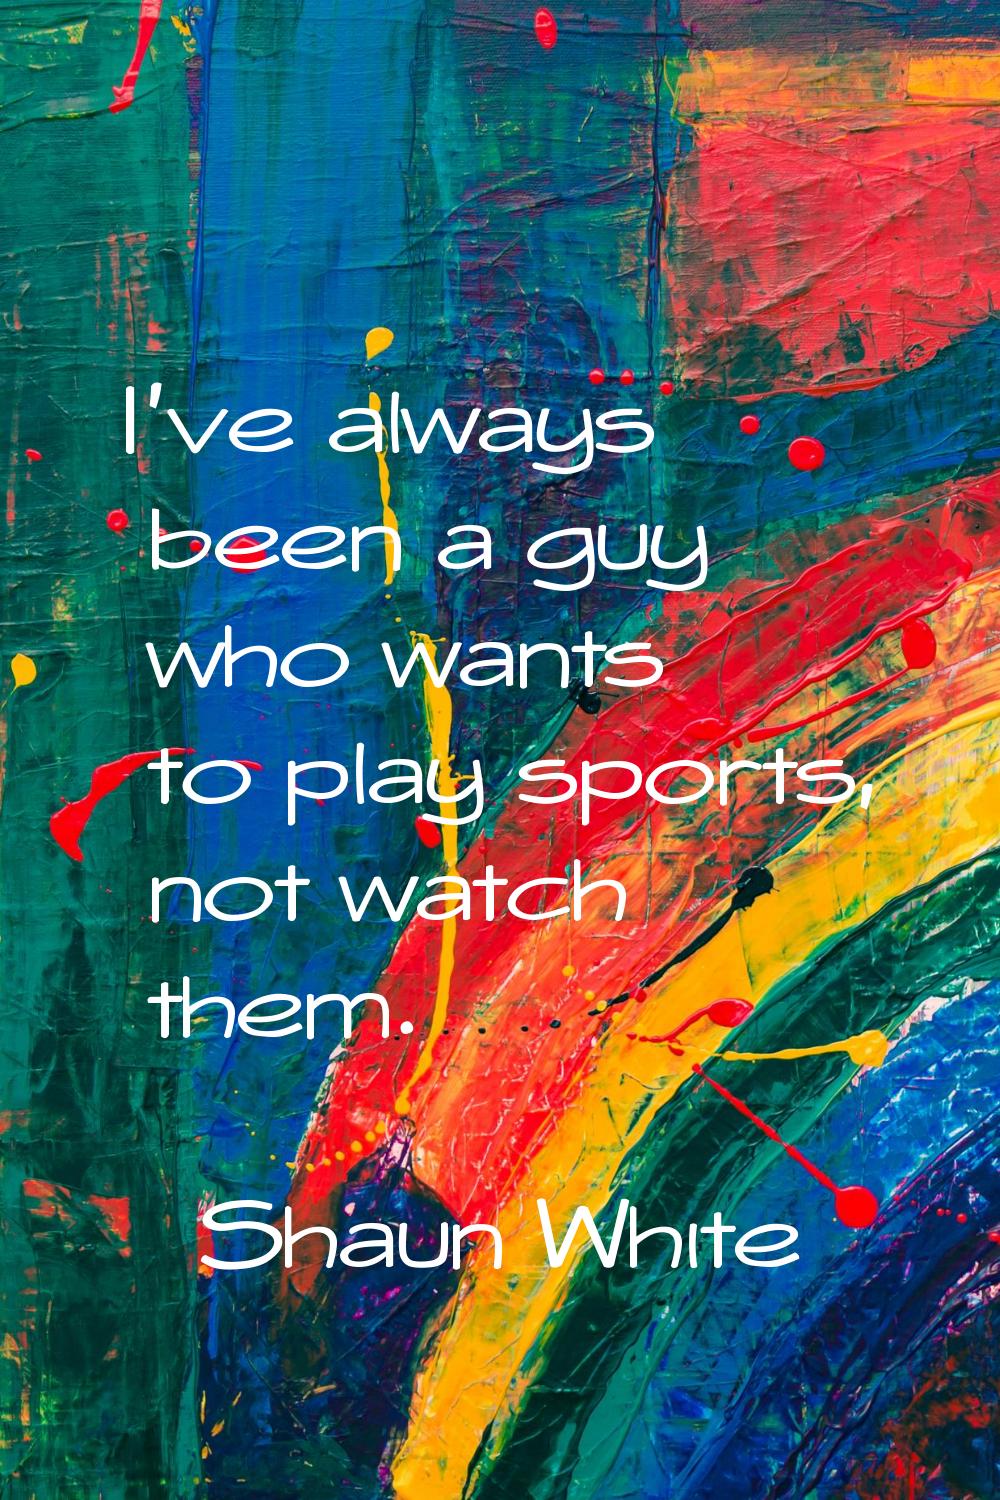 I've always been a guy who wants to play sports, not watch them.